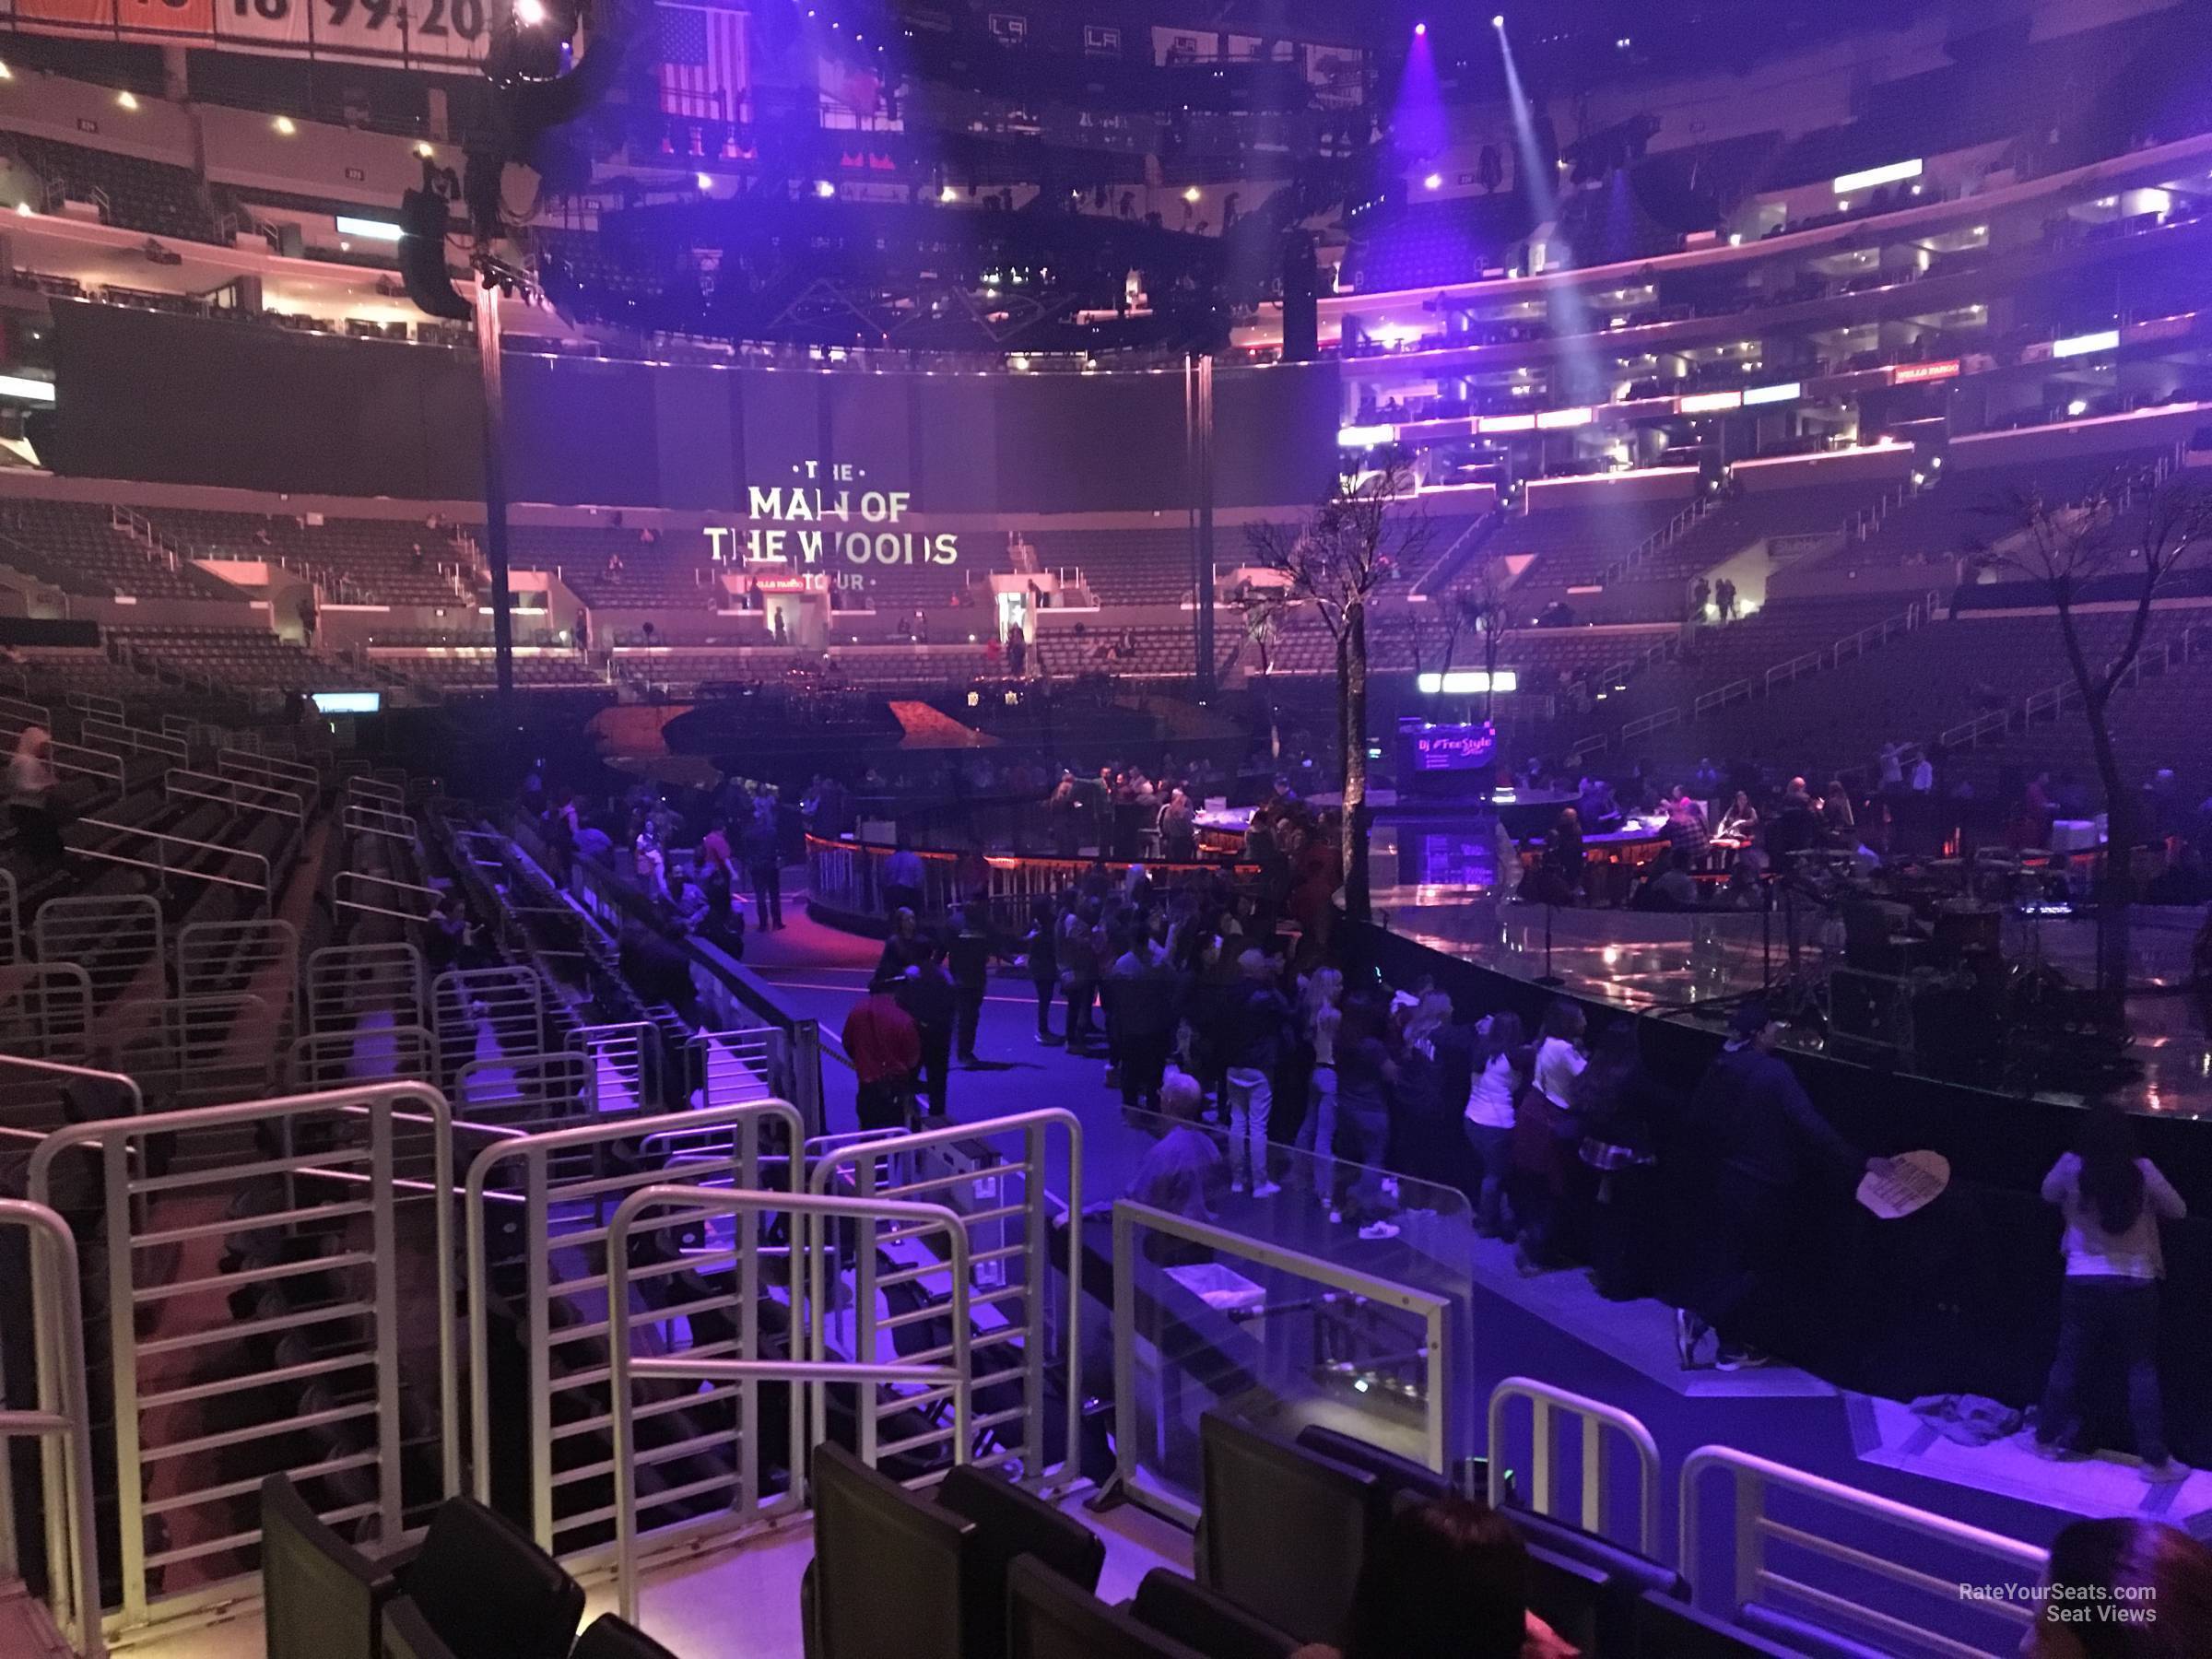 section 109, row 5 seat view  for concert - crypto.com arena